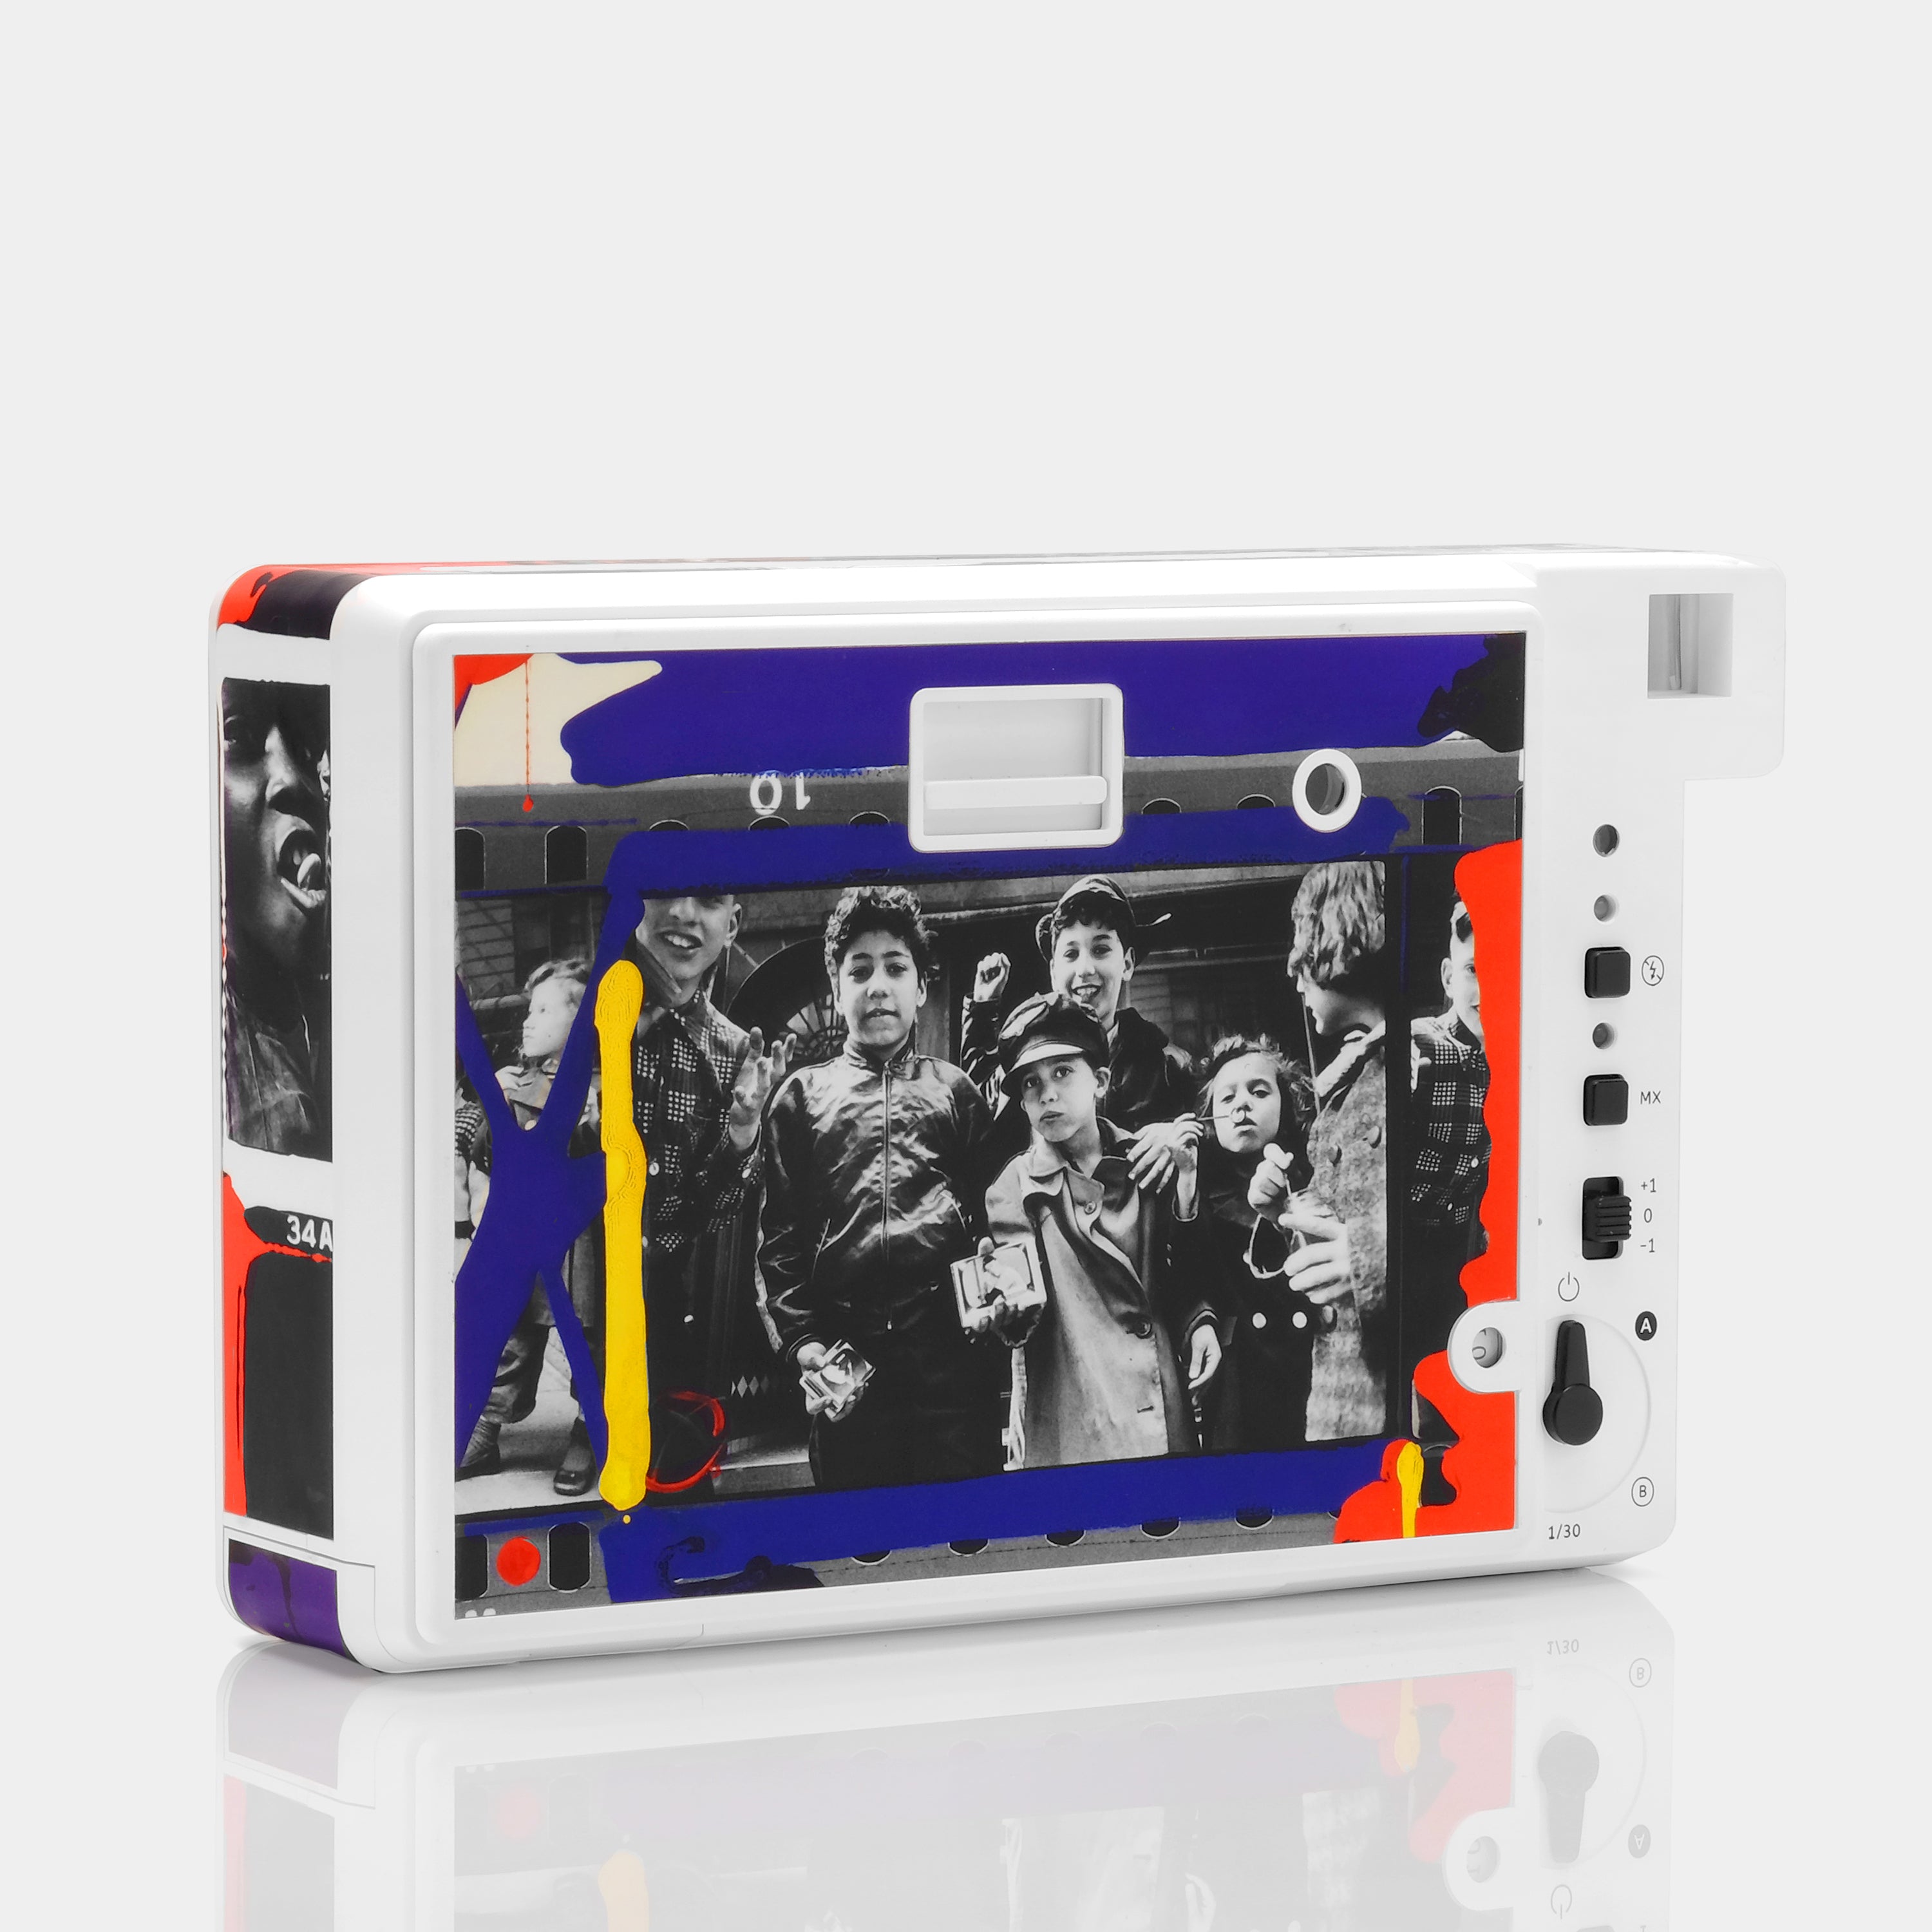 Lomography Lomo'Instant Wide (William Klein Edition) Instax Instant Film Camera and Lenses